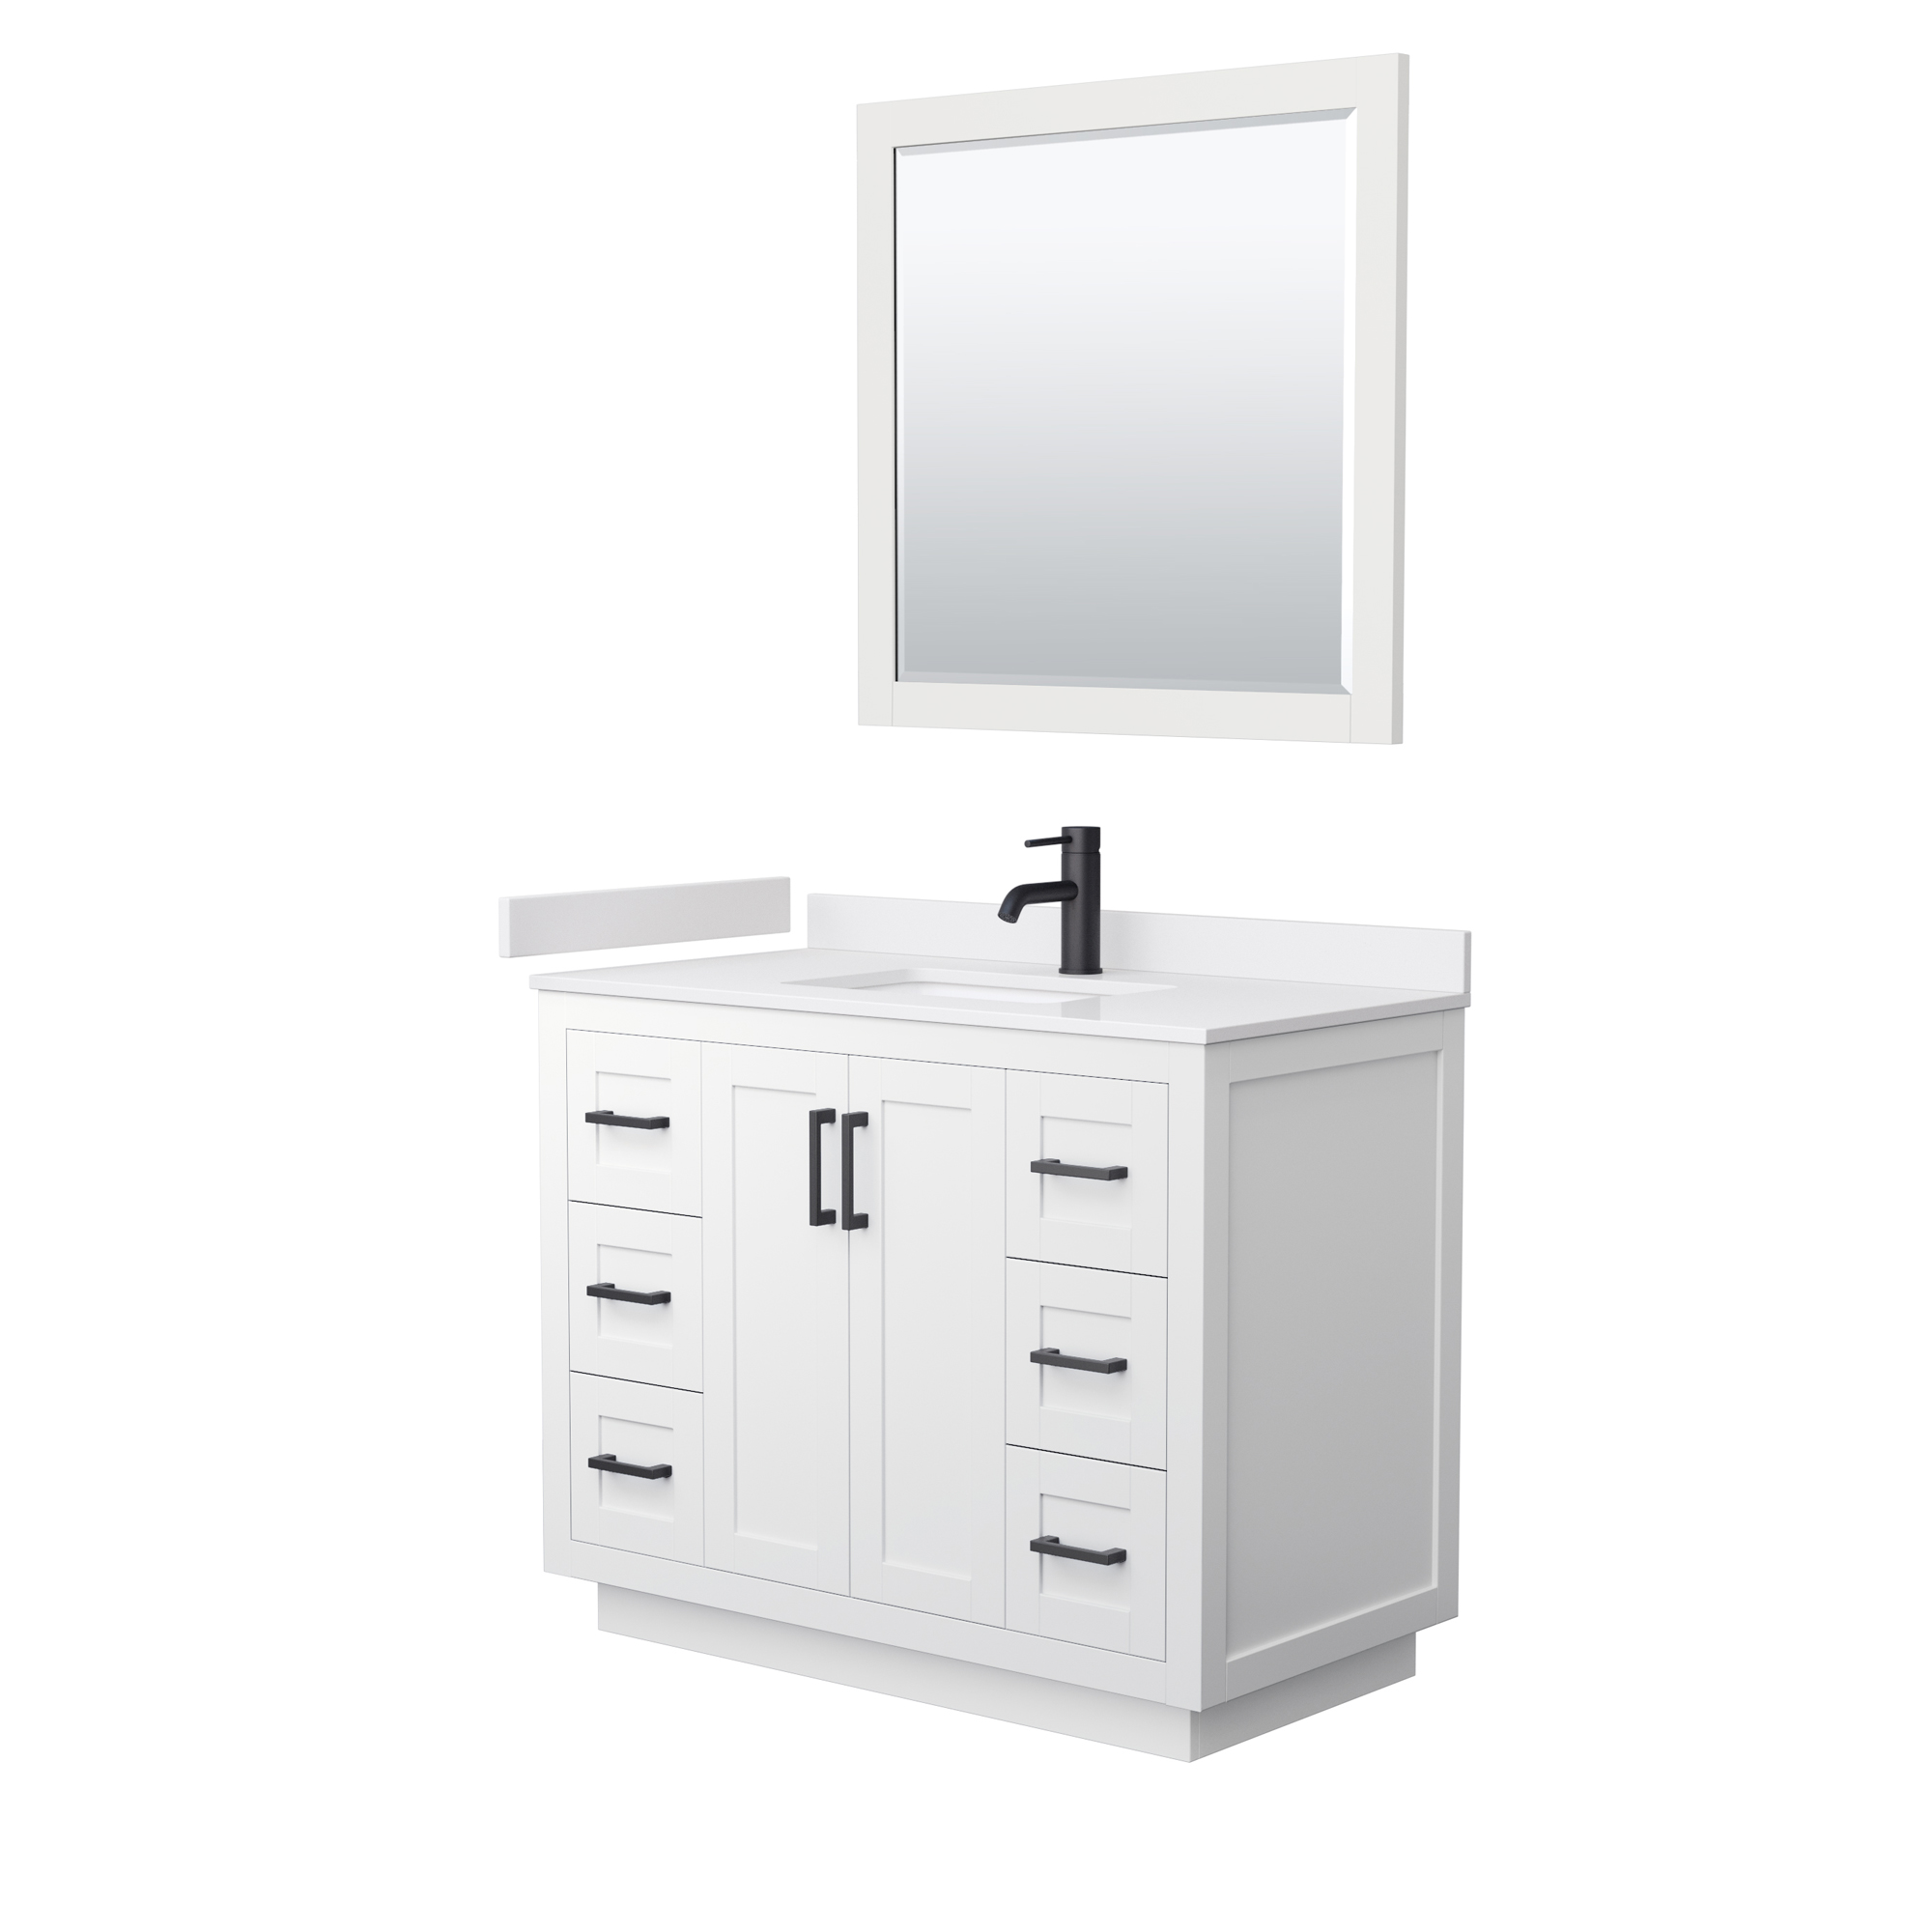 Miranda 42" Single Vanity with Cultured Marble Counter - White WC-2929-42-SGL-VAN-WHT-